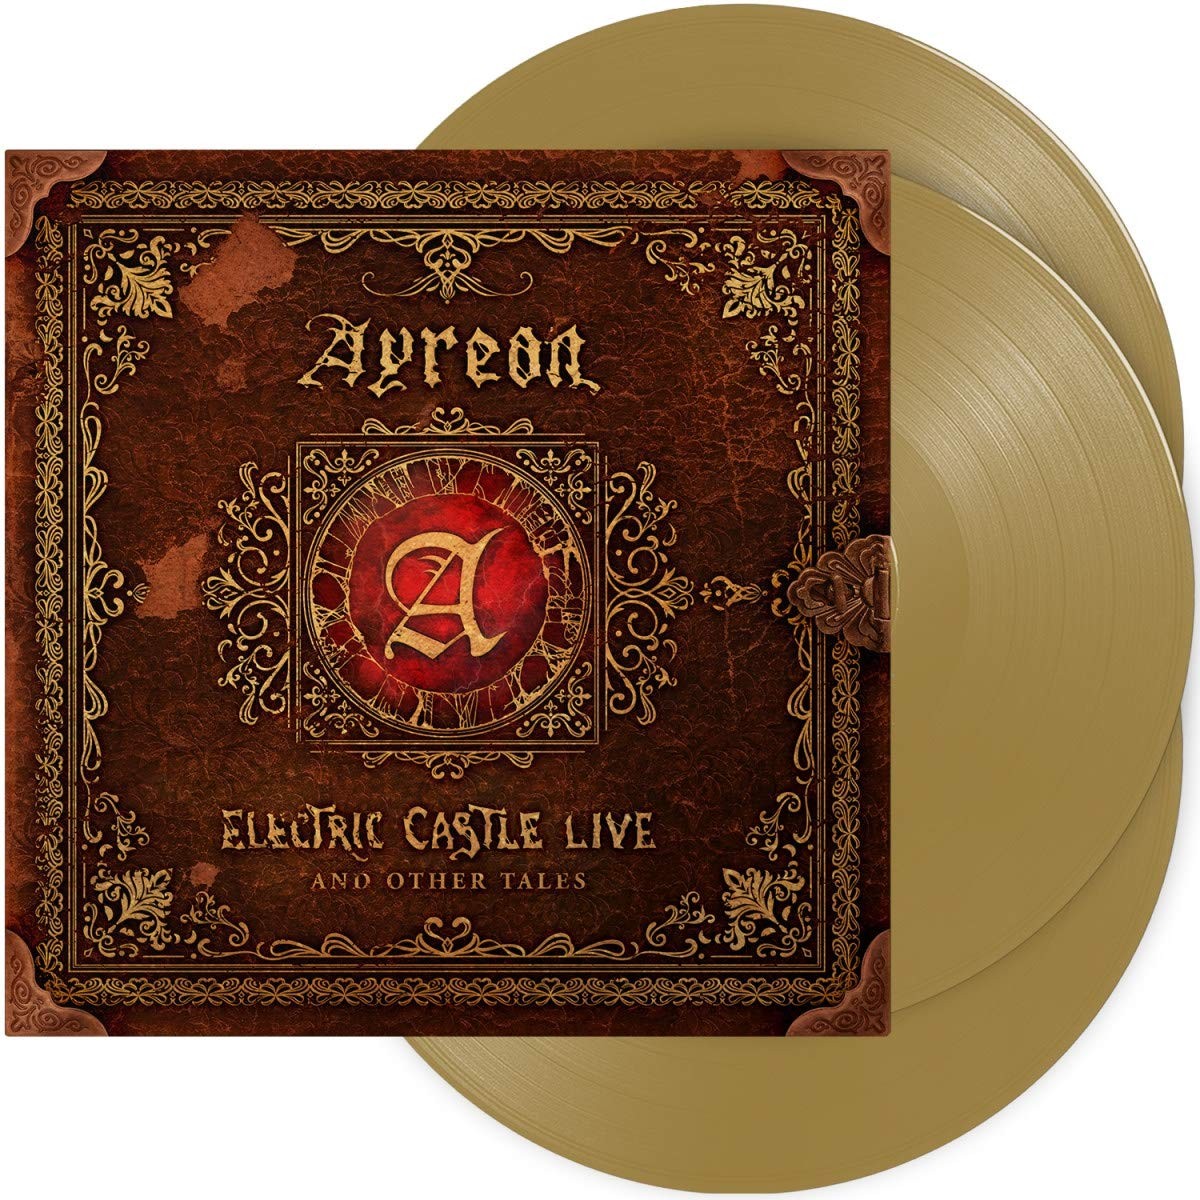 Ayreon - Electric Castle Live And Other Tales